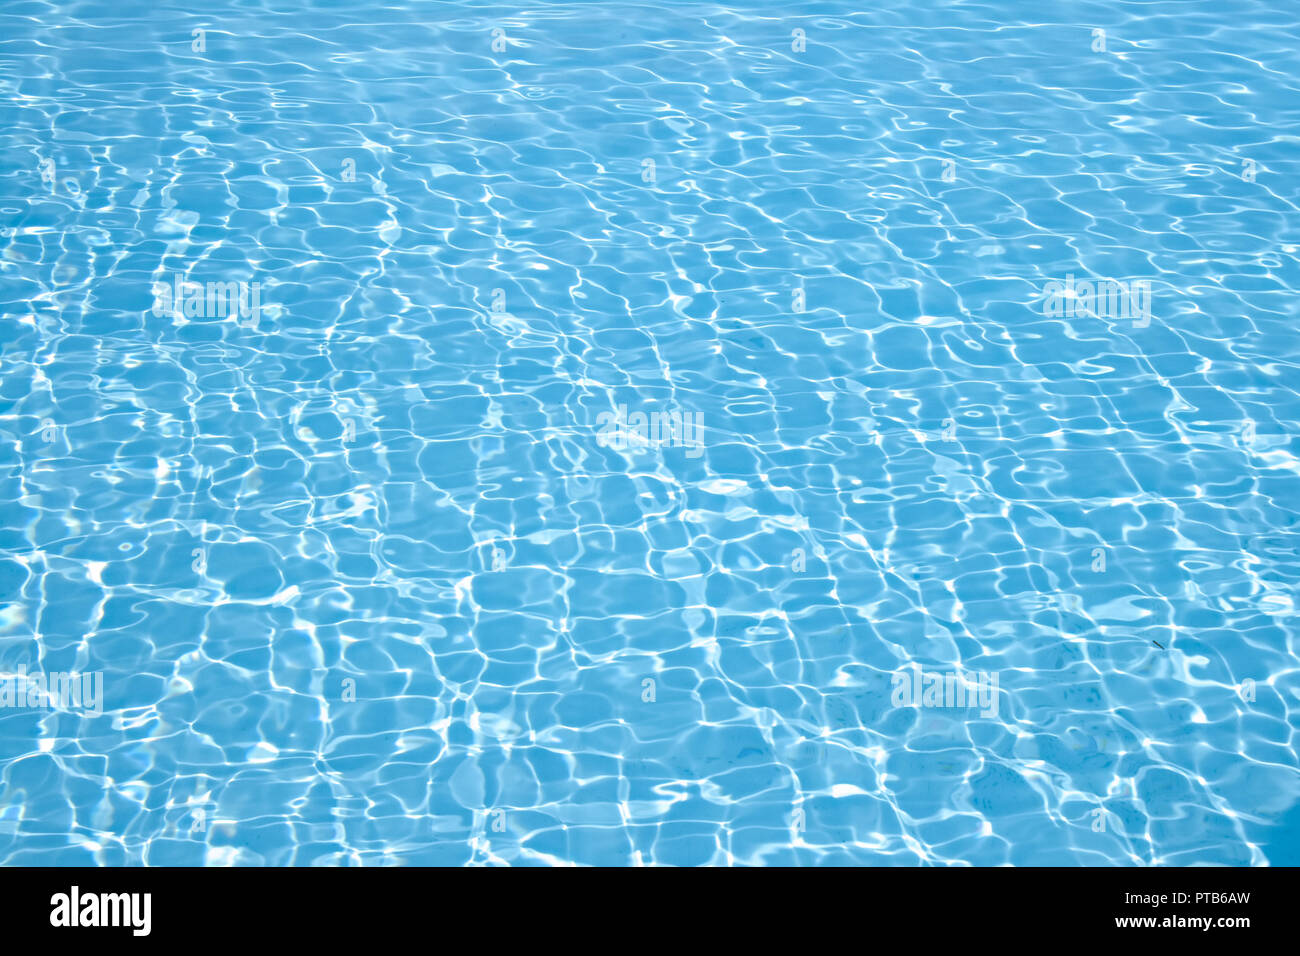 Wonderful crystal light blue clear water of a swimming pool Stock Photo